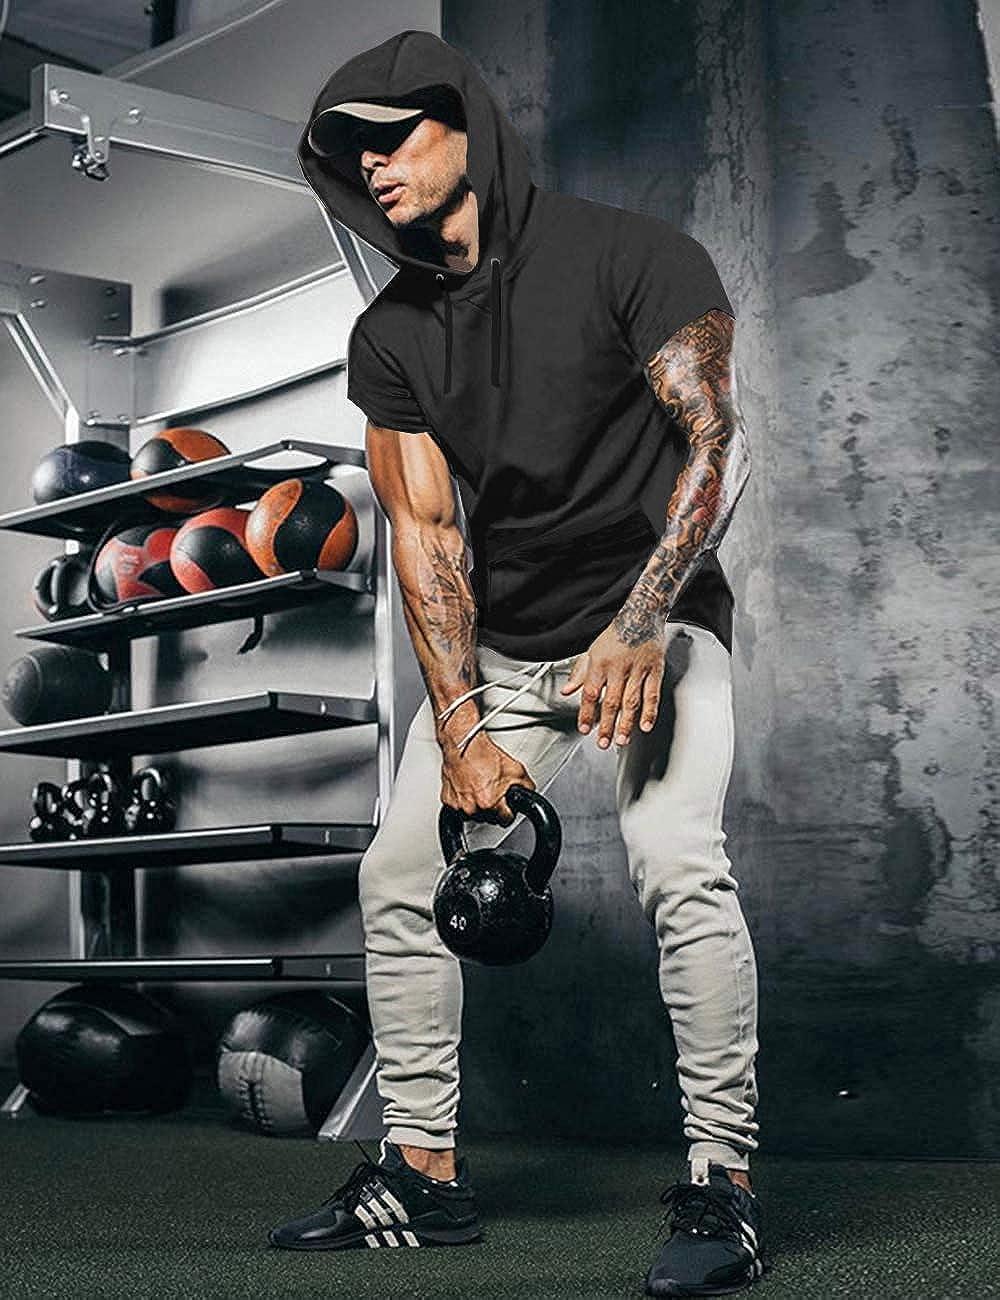 Mens Slim Fit Muscle T Shirt Gym Fitness Plain Short Sleeve Tee Top  Pullover US